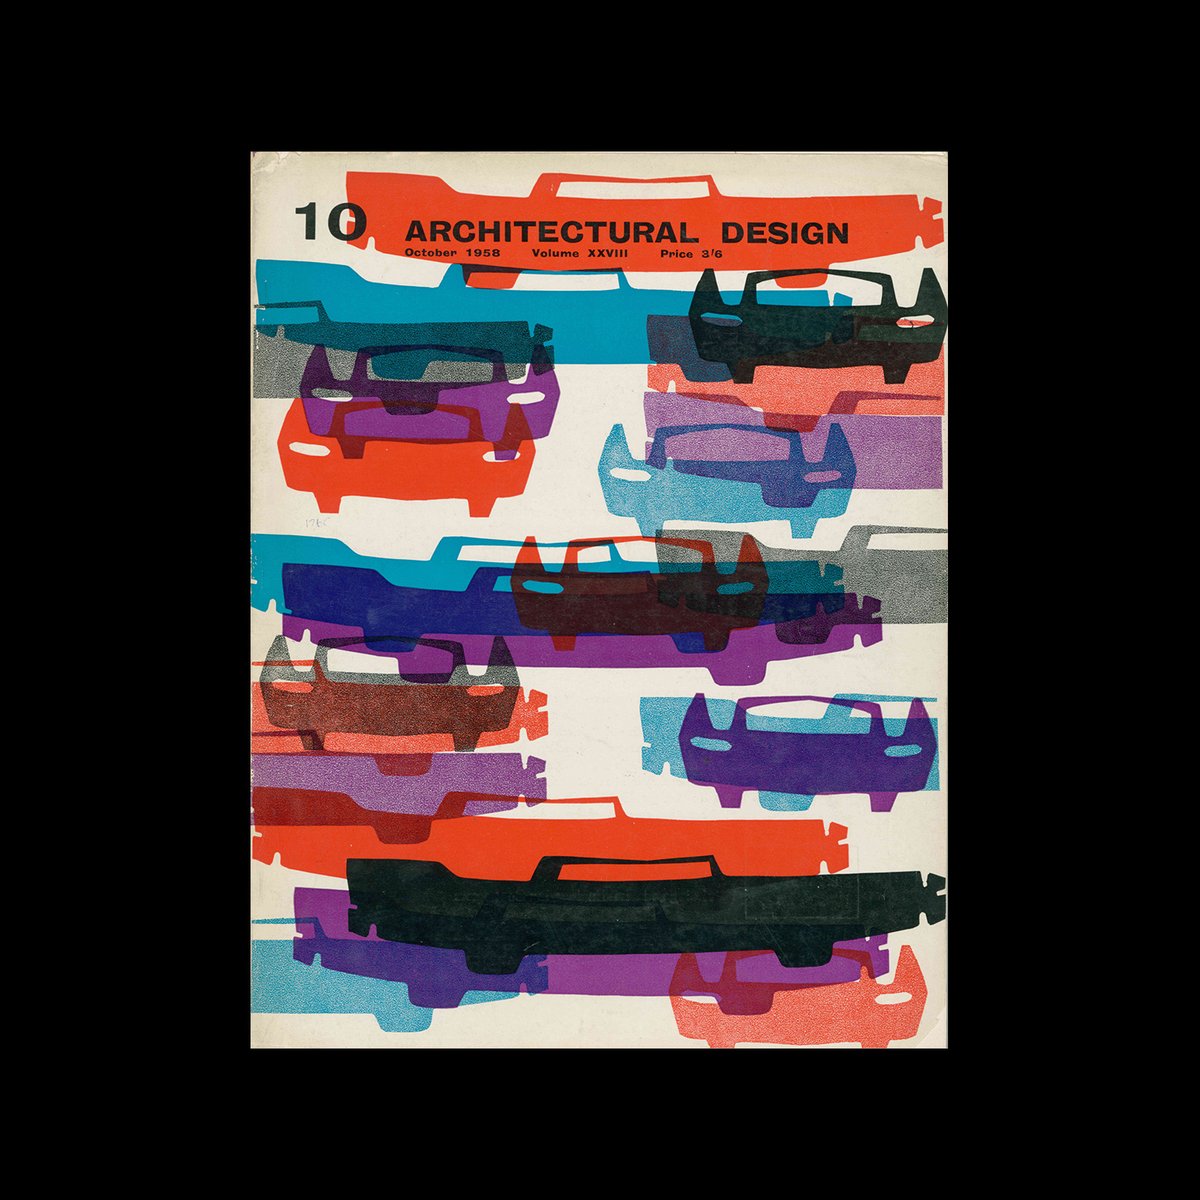 Architectural Design, October 1958 cover by #TheoCrosby
Fantasy on the idea of #mobility, the subject of the magazine's opinion discussed in this issue, as well as an article by Alison and Peter Smithson’s on analysing #traffic problems in cities. designreviewed.com/designer/theo-…